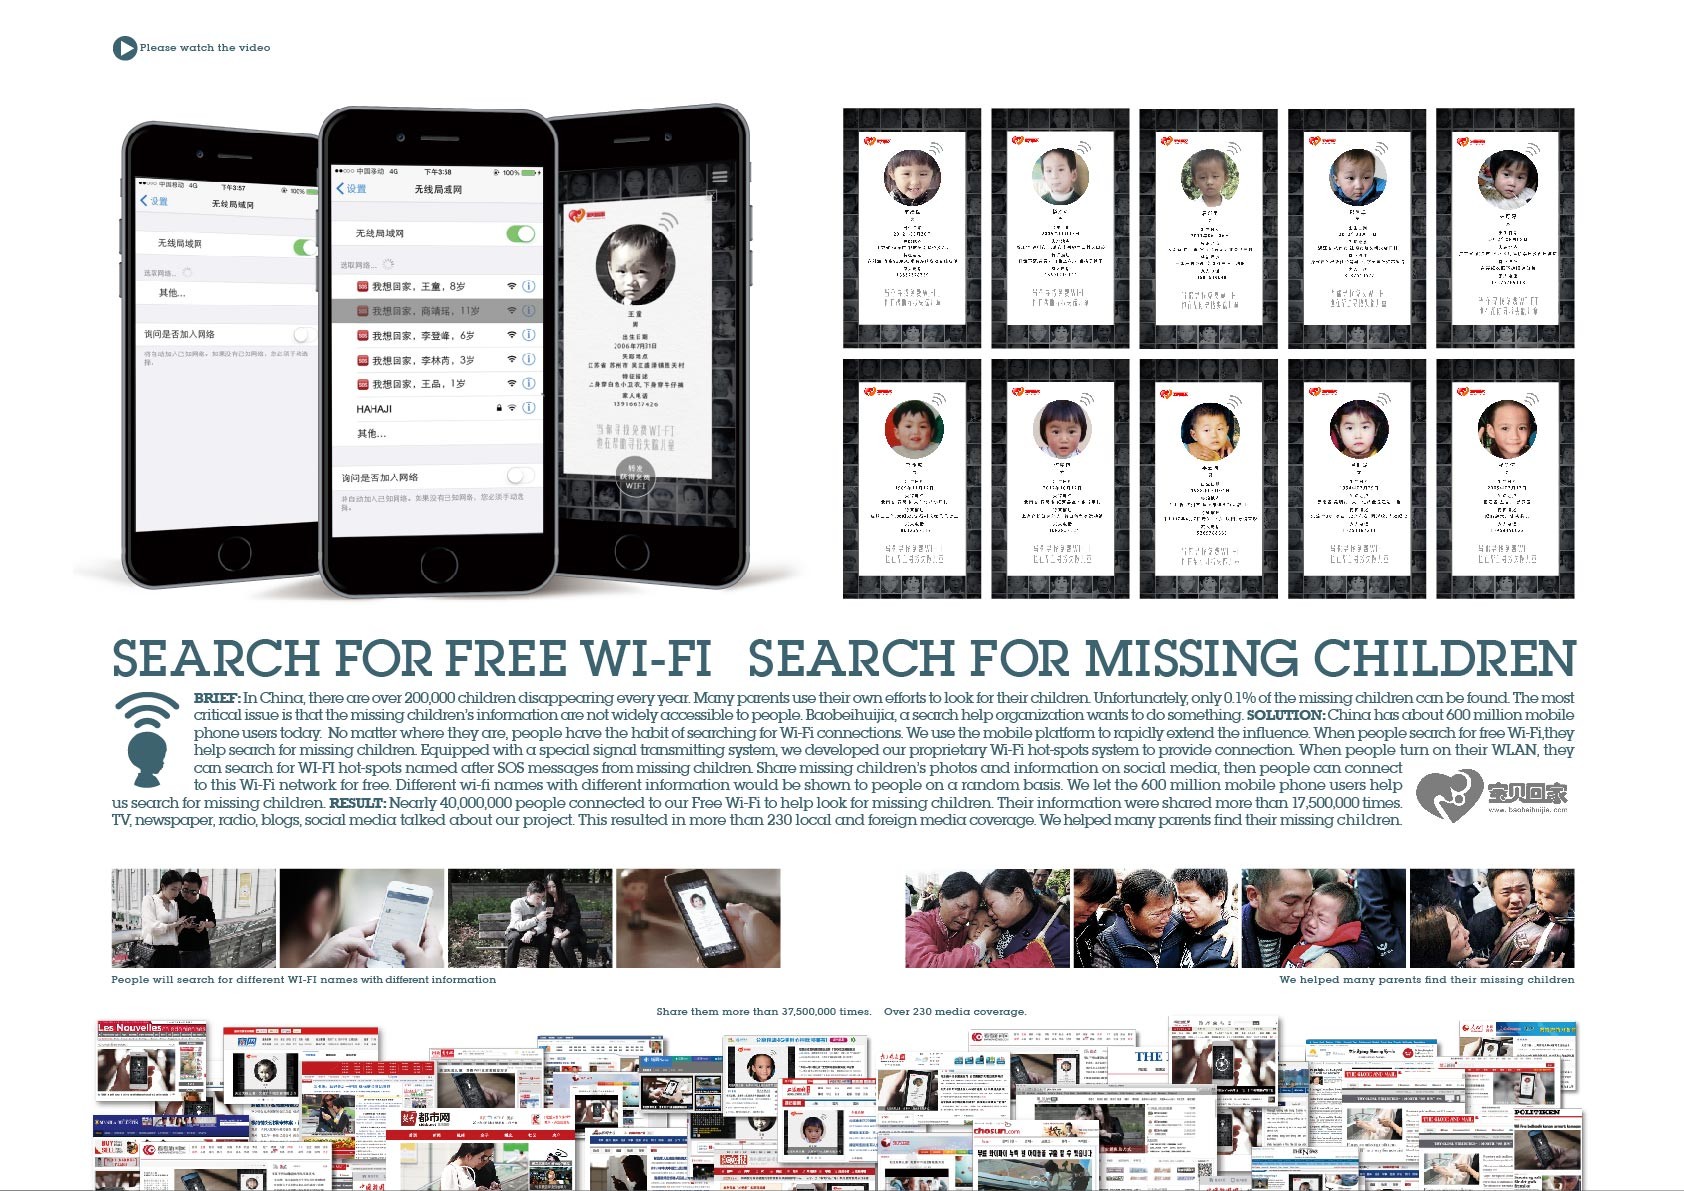 Search For Free Wi-Fi, Search For Missing Children